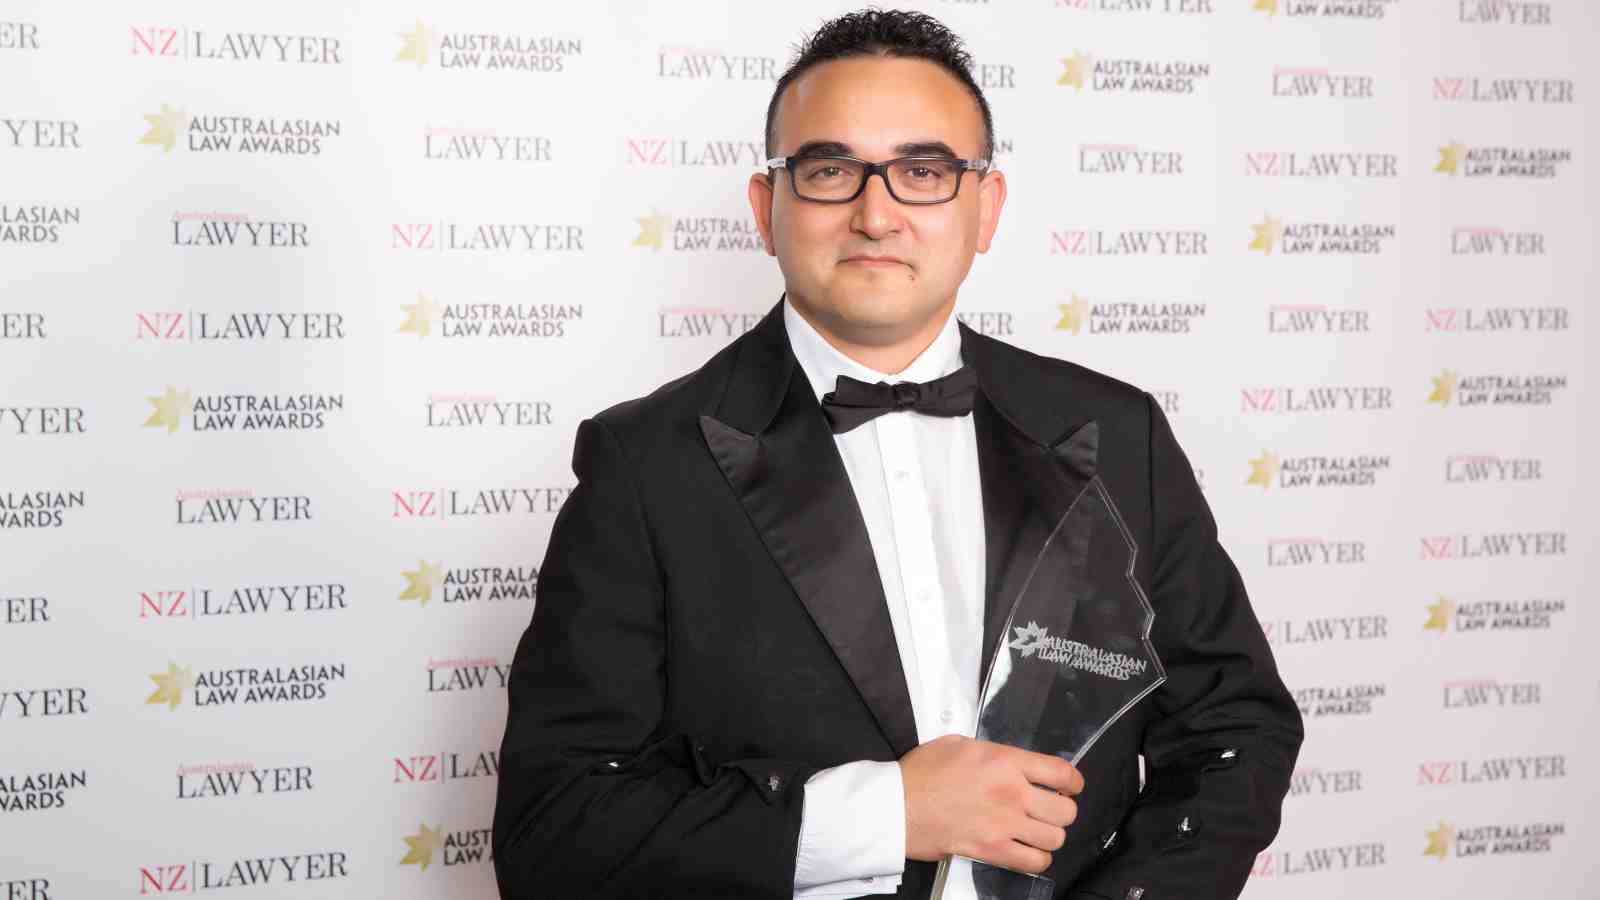 Justin Forsell collects prize for Australasian lawyer of the year